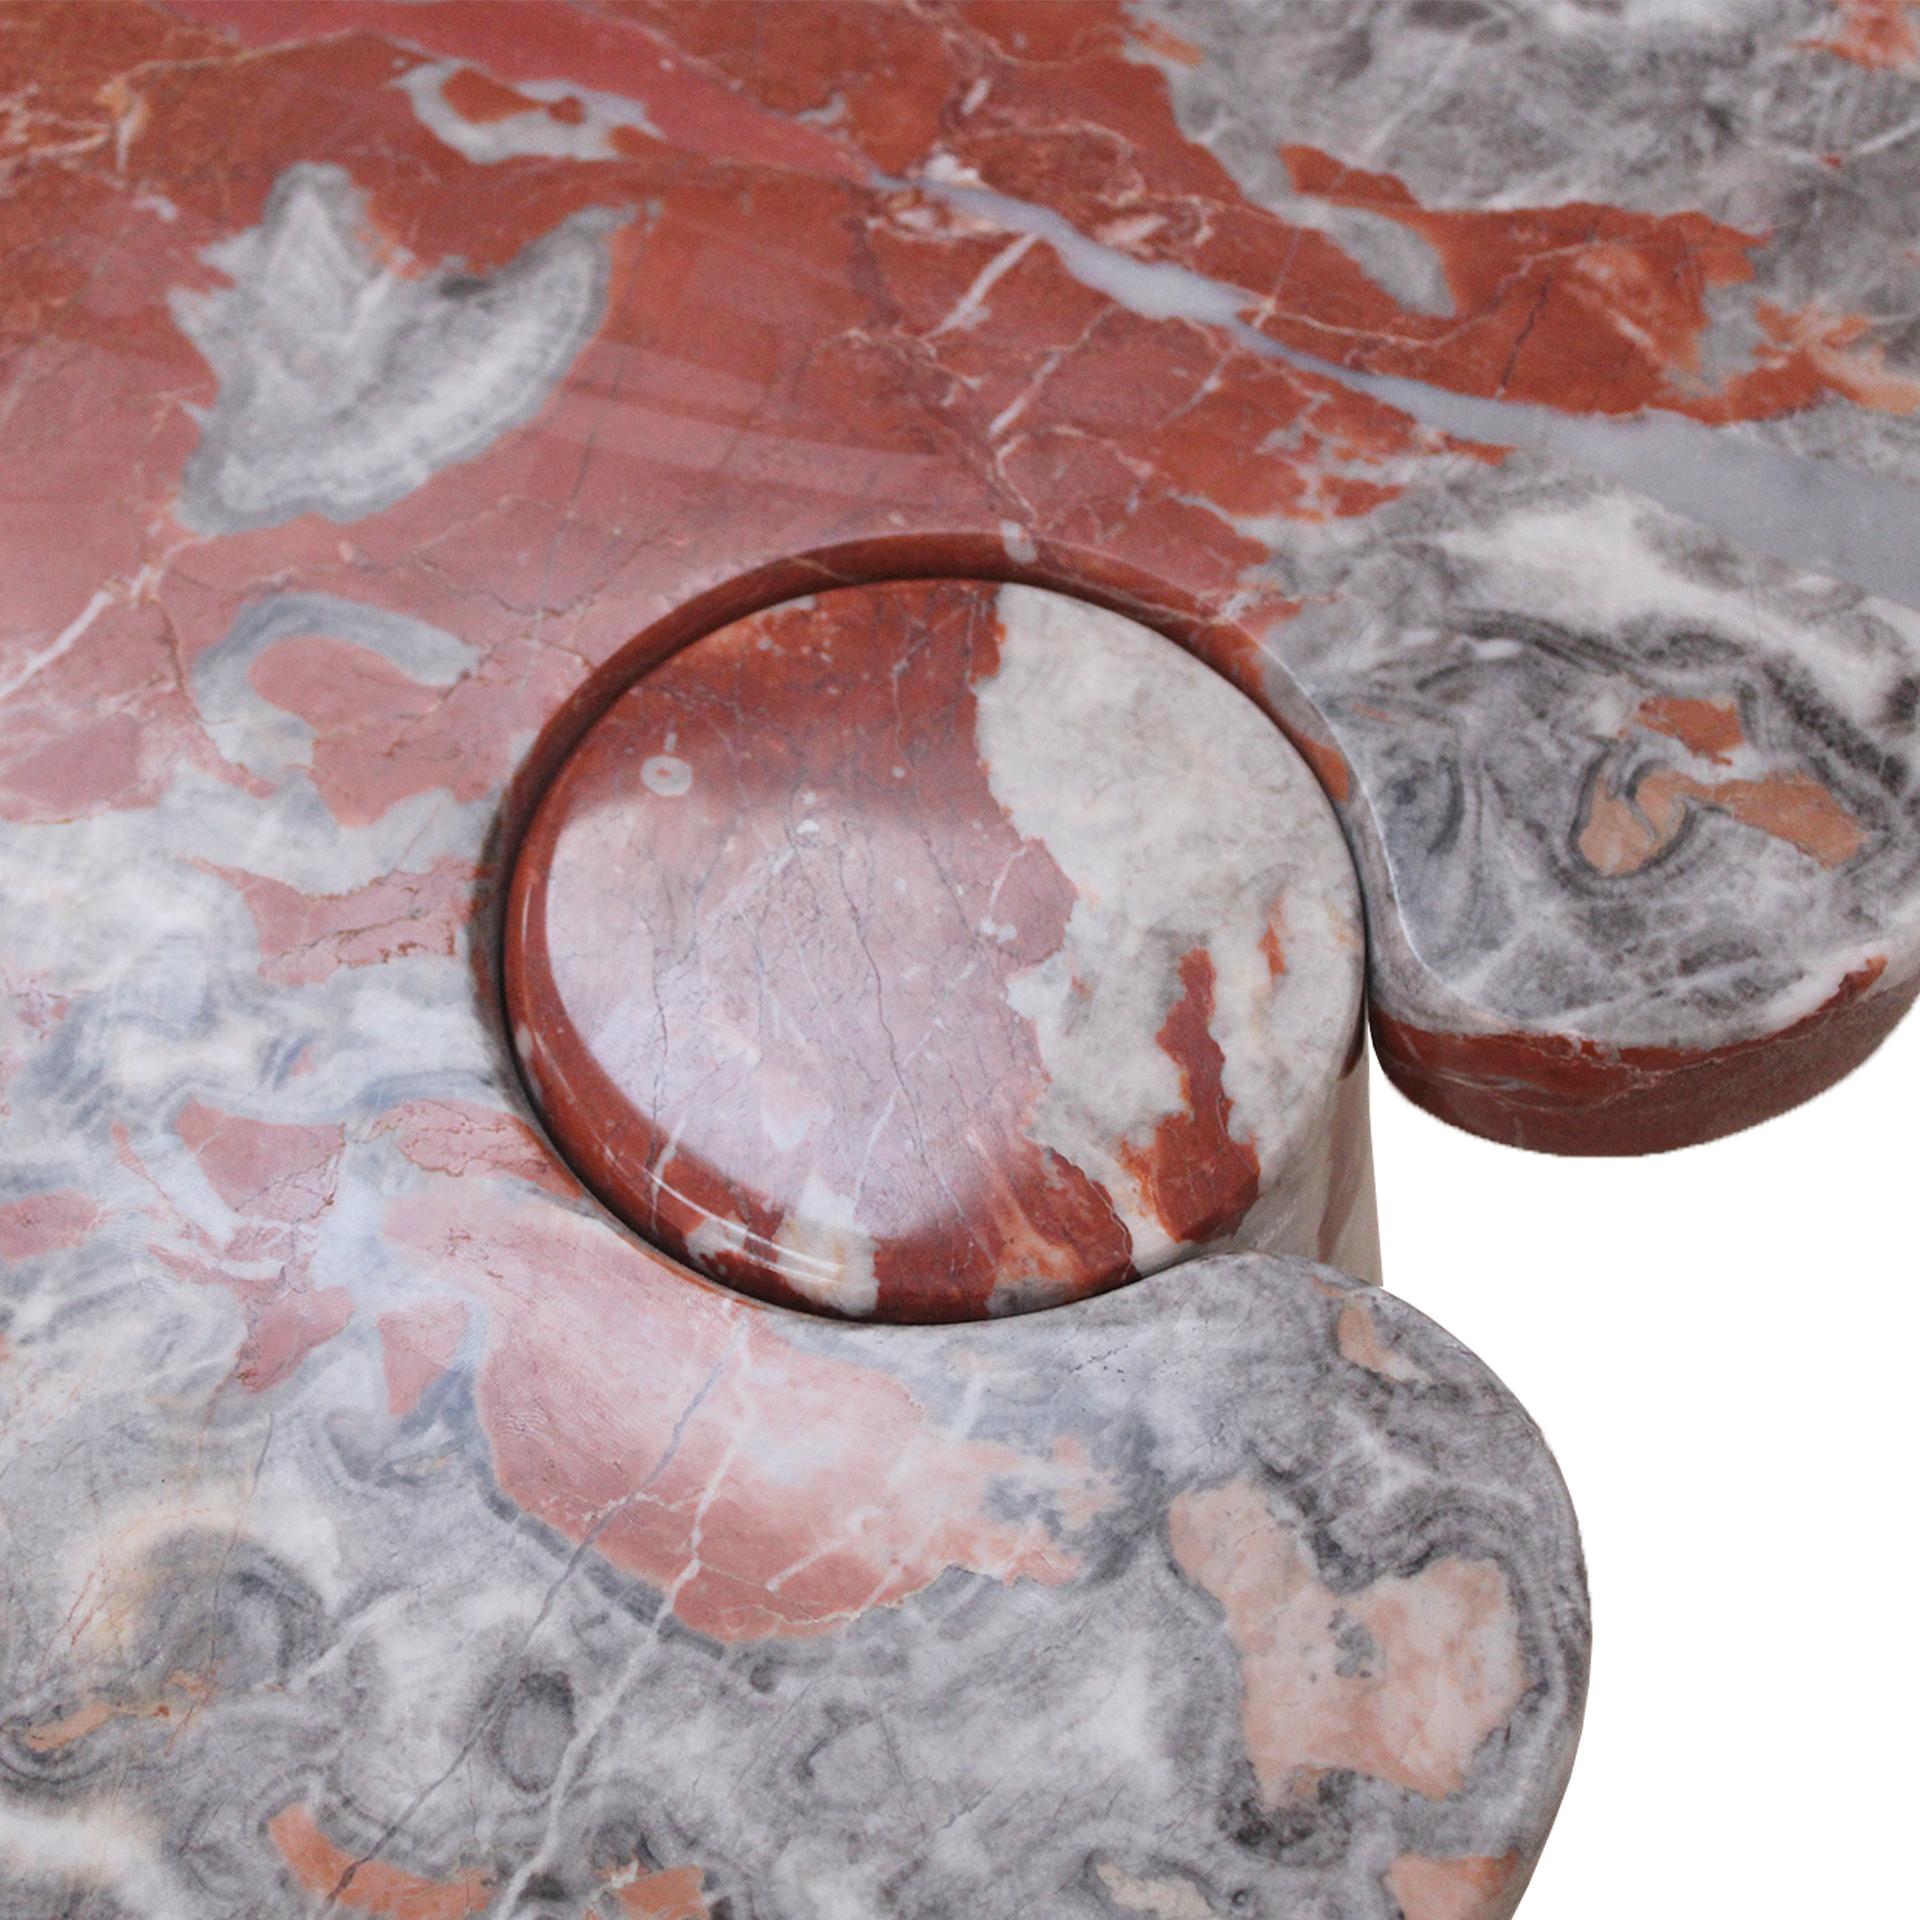 Midcentury Angelo Mangiarotti Italian Eros Console Coral Red Marble for Skipper For Sale 1